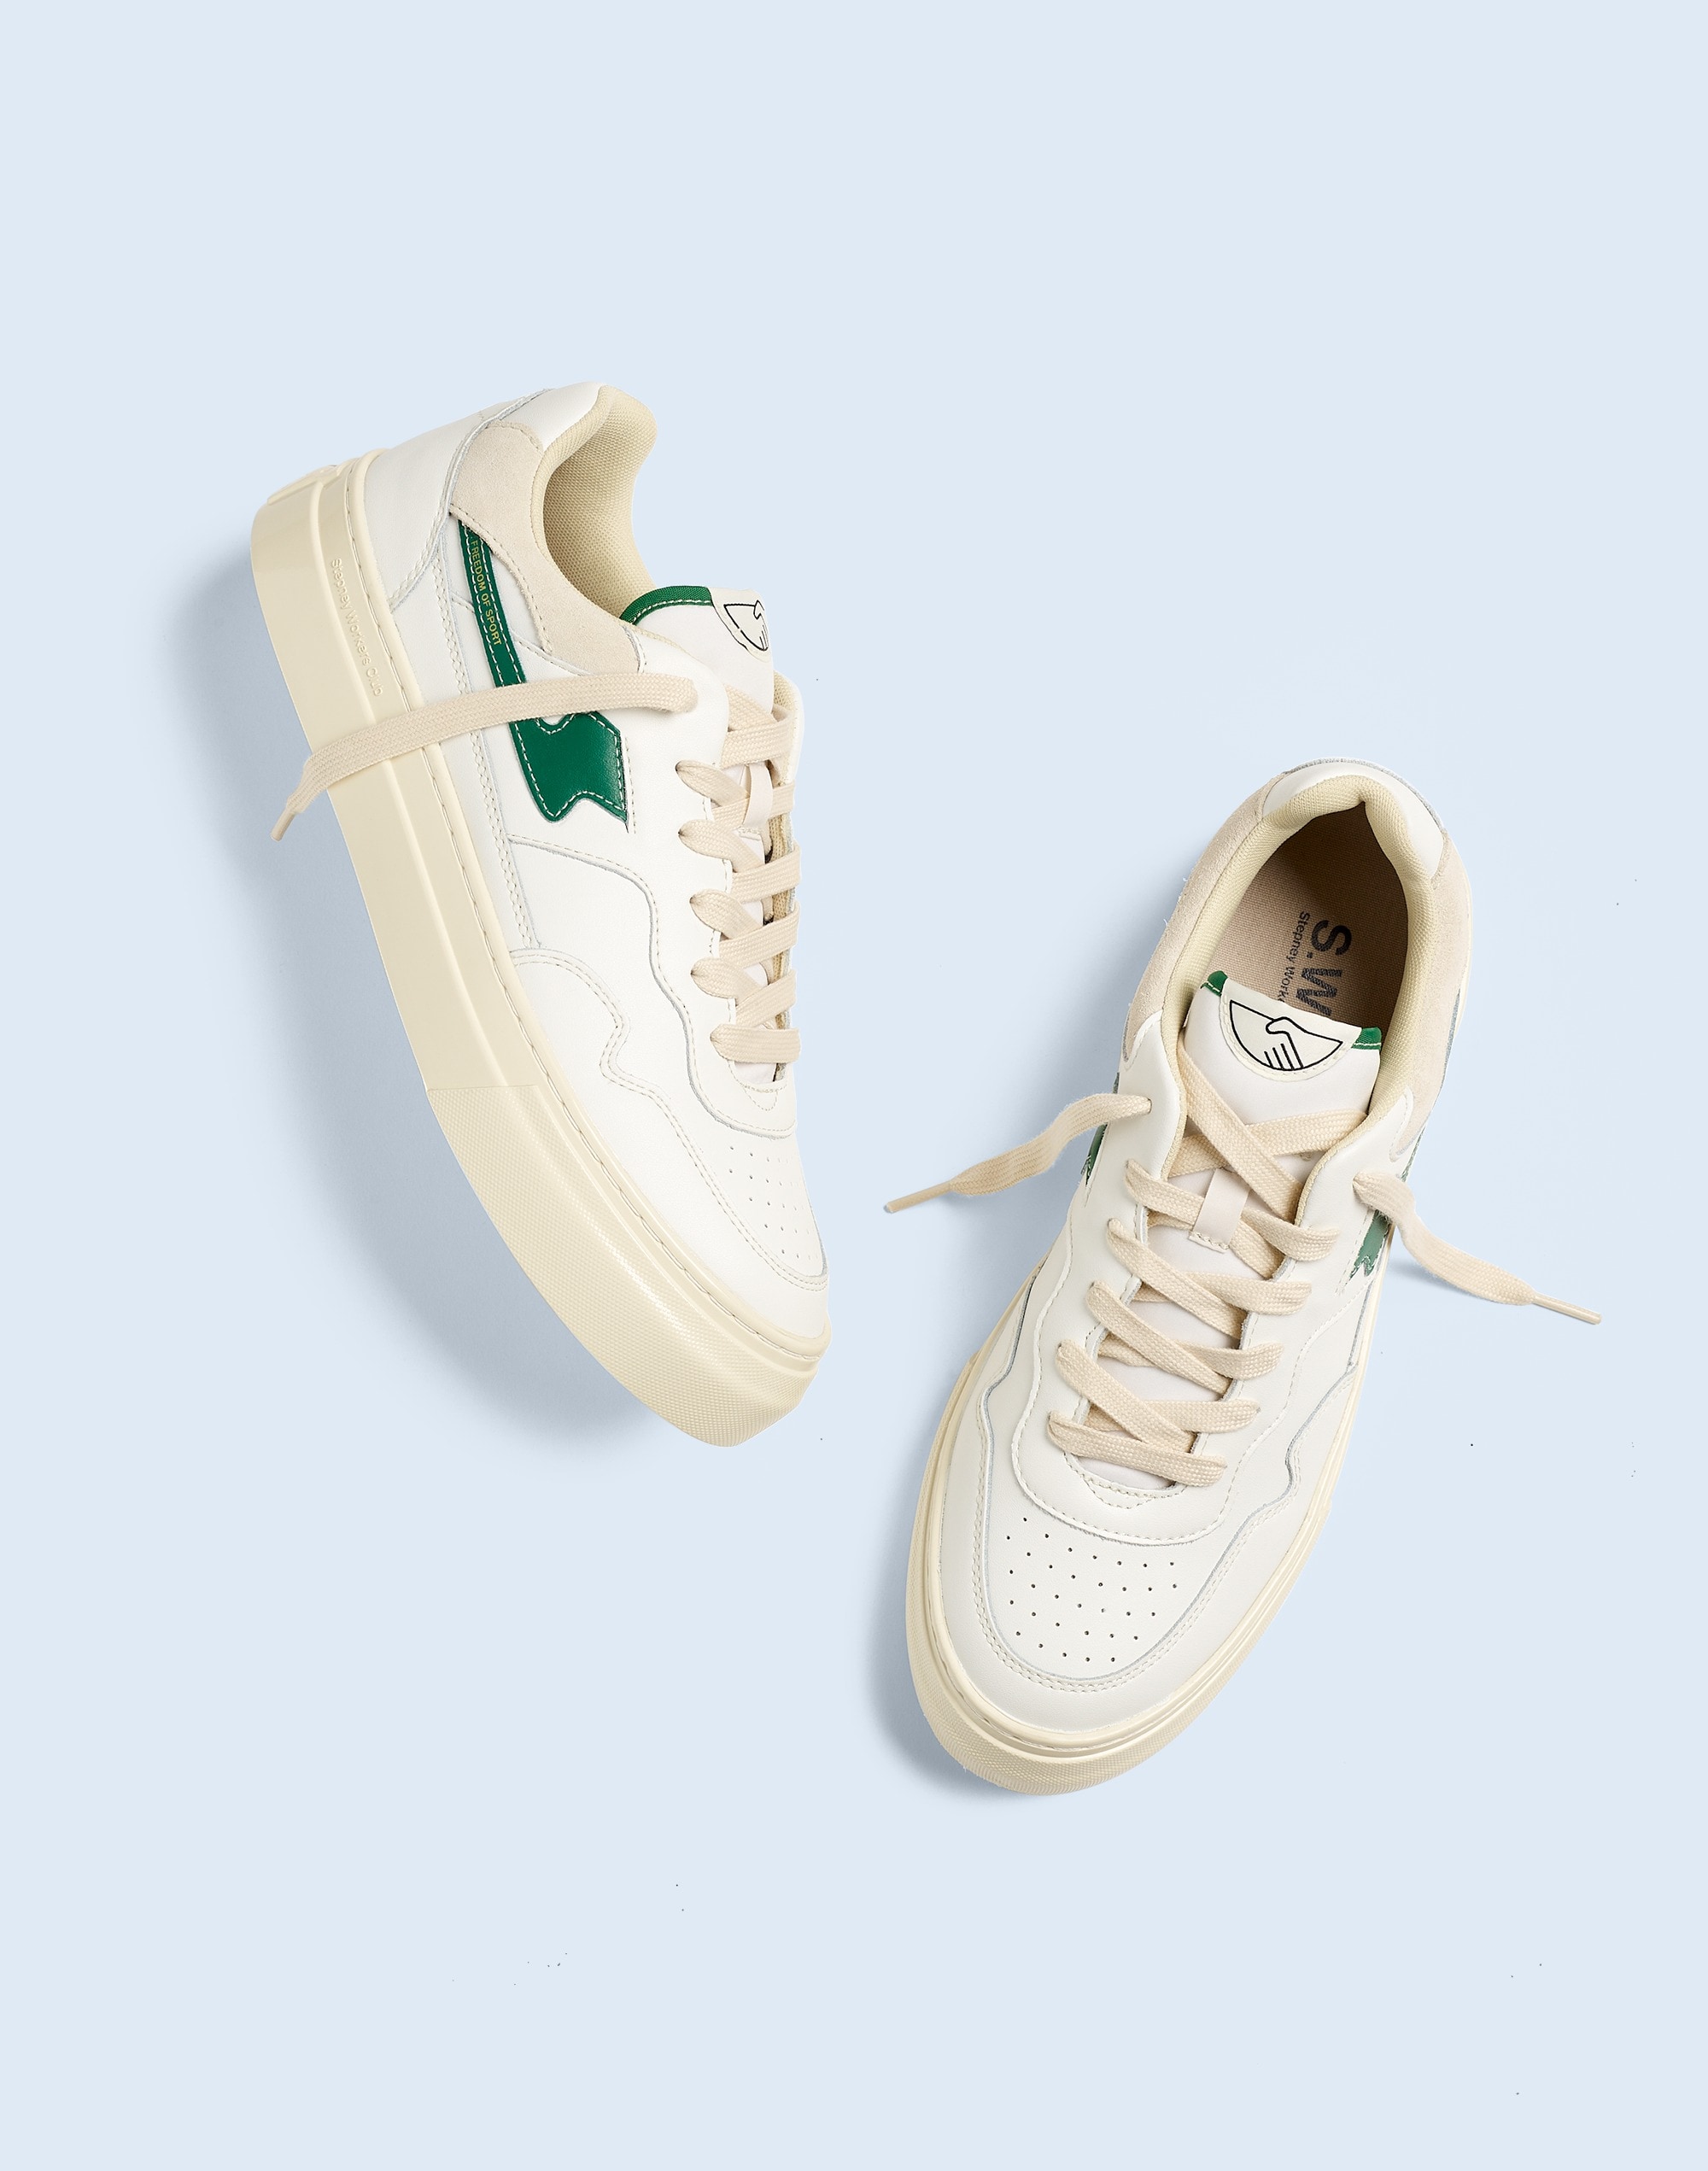 Shop Mw Stepney Workers Club Pearl S-strike Sneakers In White And Green